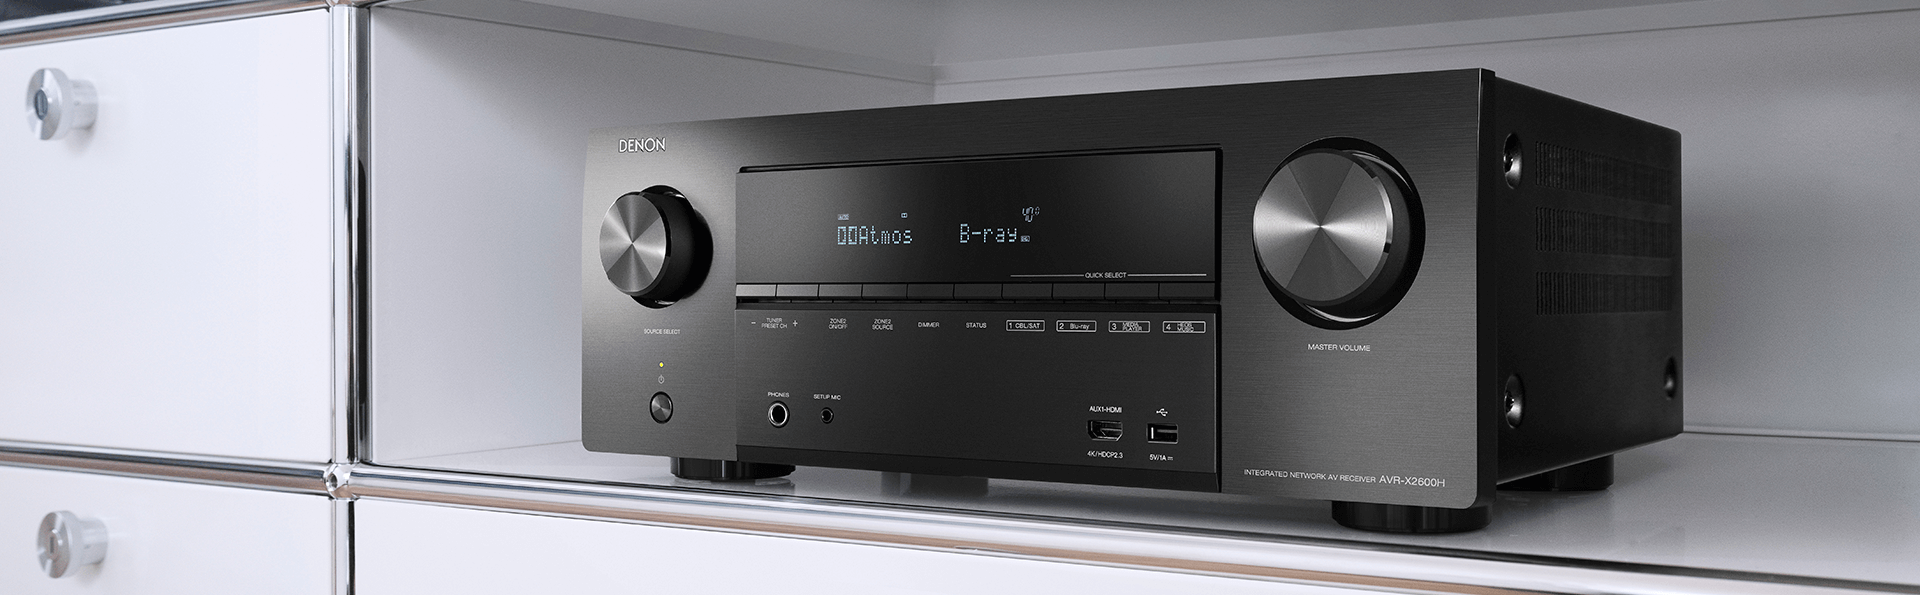 2 Outputs with eARC Alexa & HEOS AirPlay 2 8 HDMI Inputs 95W Each Denon AVR-X2600H 4K UHD AV Receiver 2019 Model Dual Subwoofer Outputs 7.2 Channel New Dolby Atmos Height Virtualization 